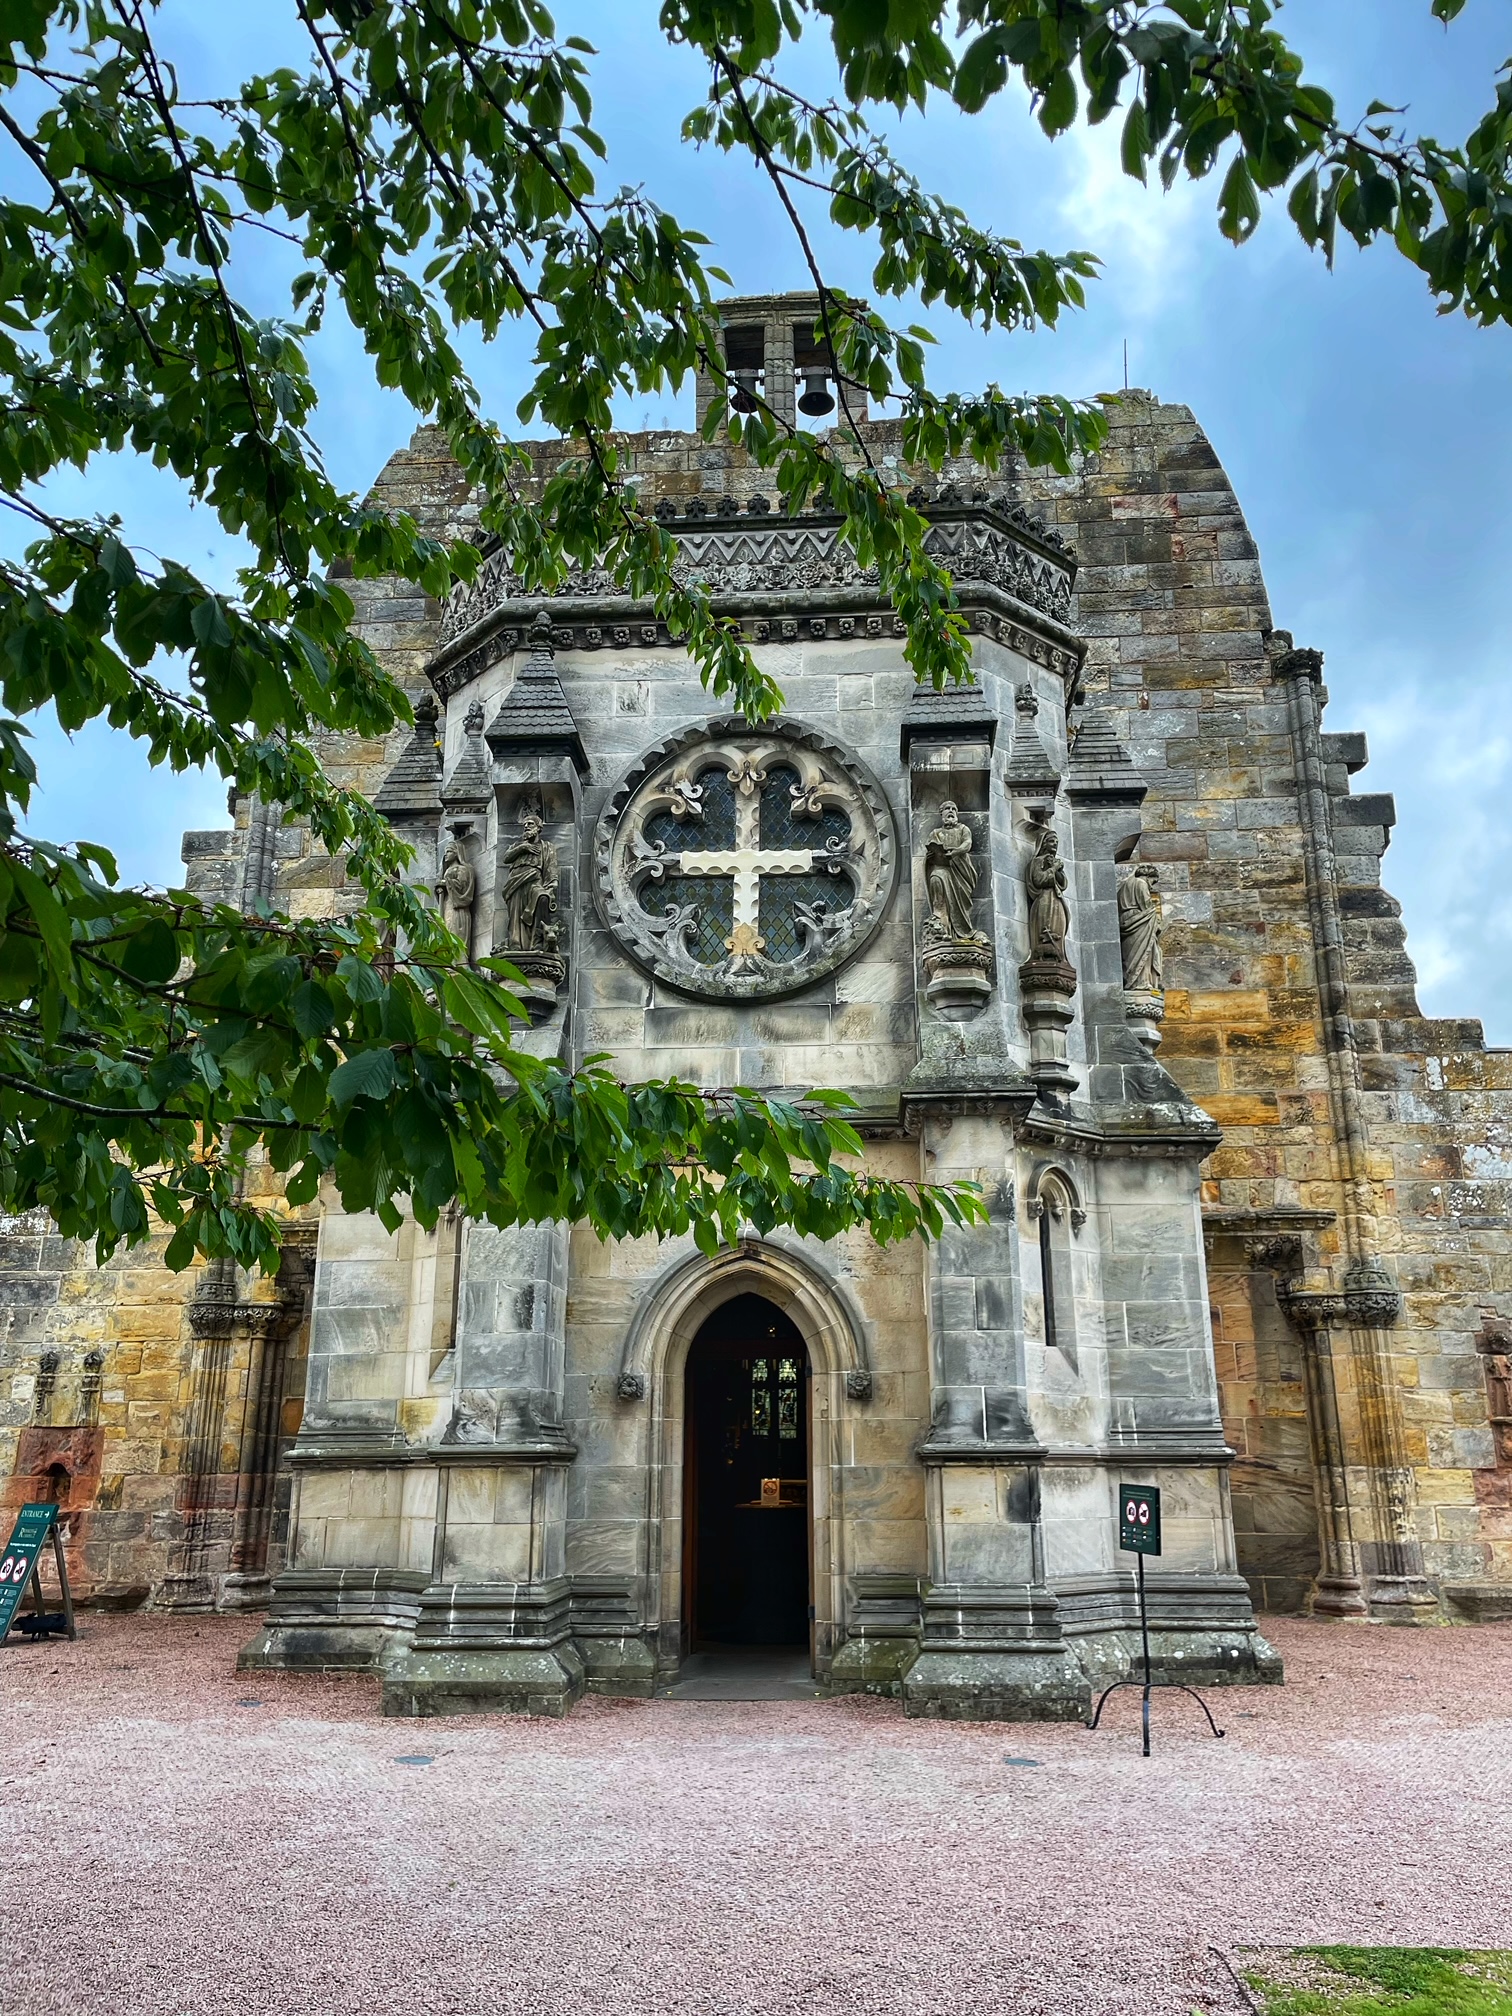 Medieval Rosslyn Chapel was made famous for being featured in the The Da Vinci Code. It's intricate carvings are associated with many legends and secrets.